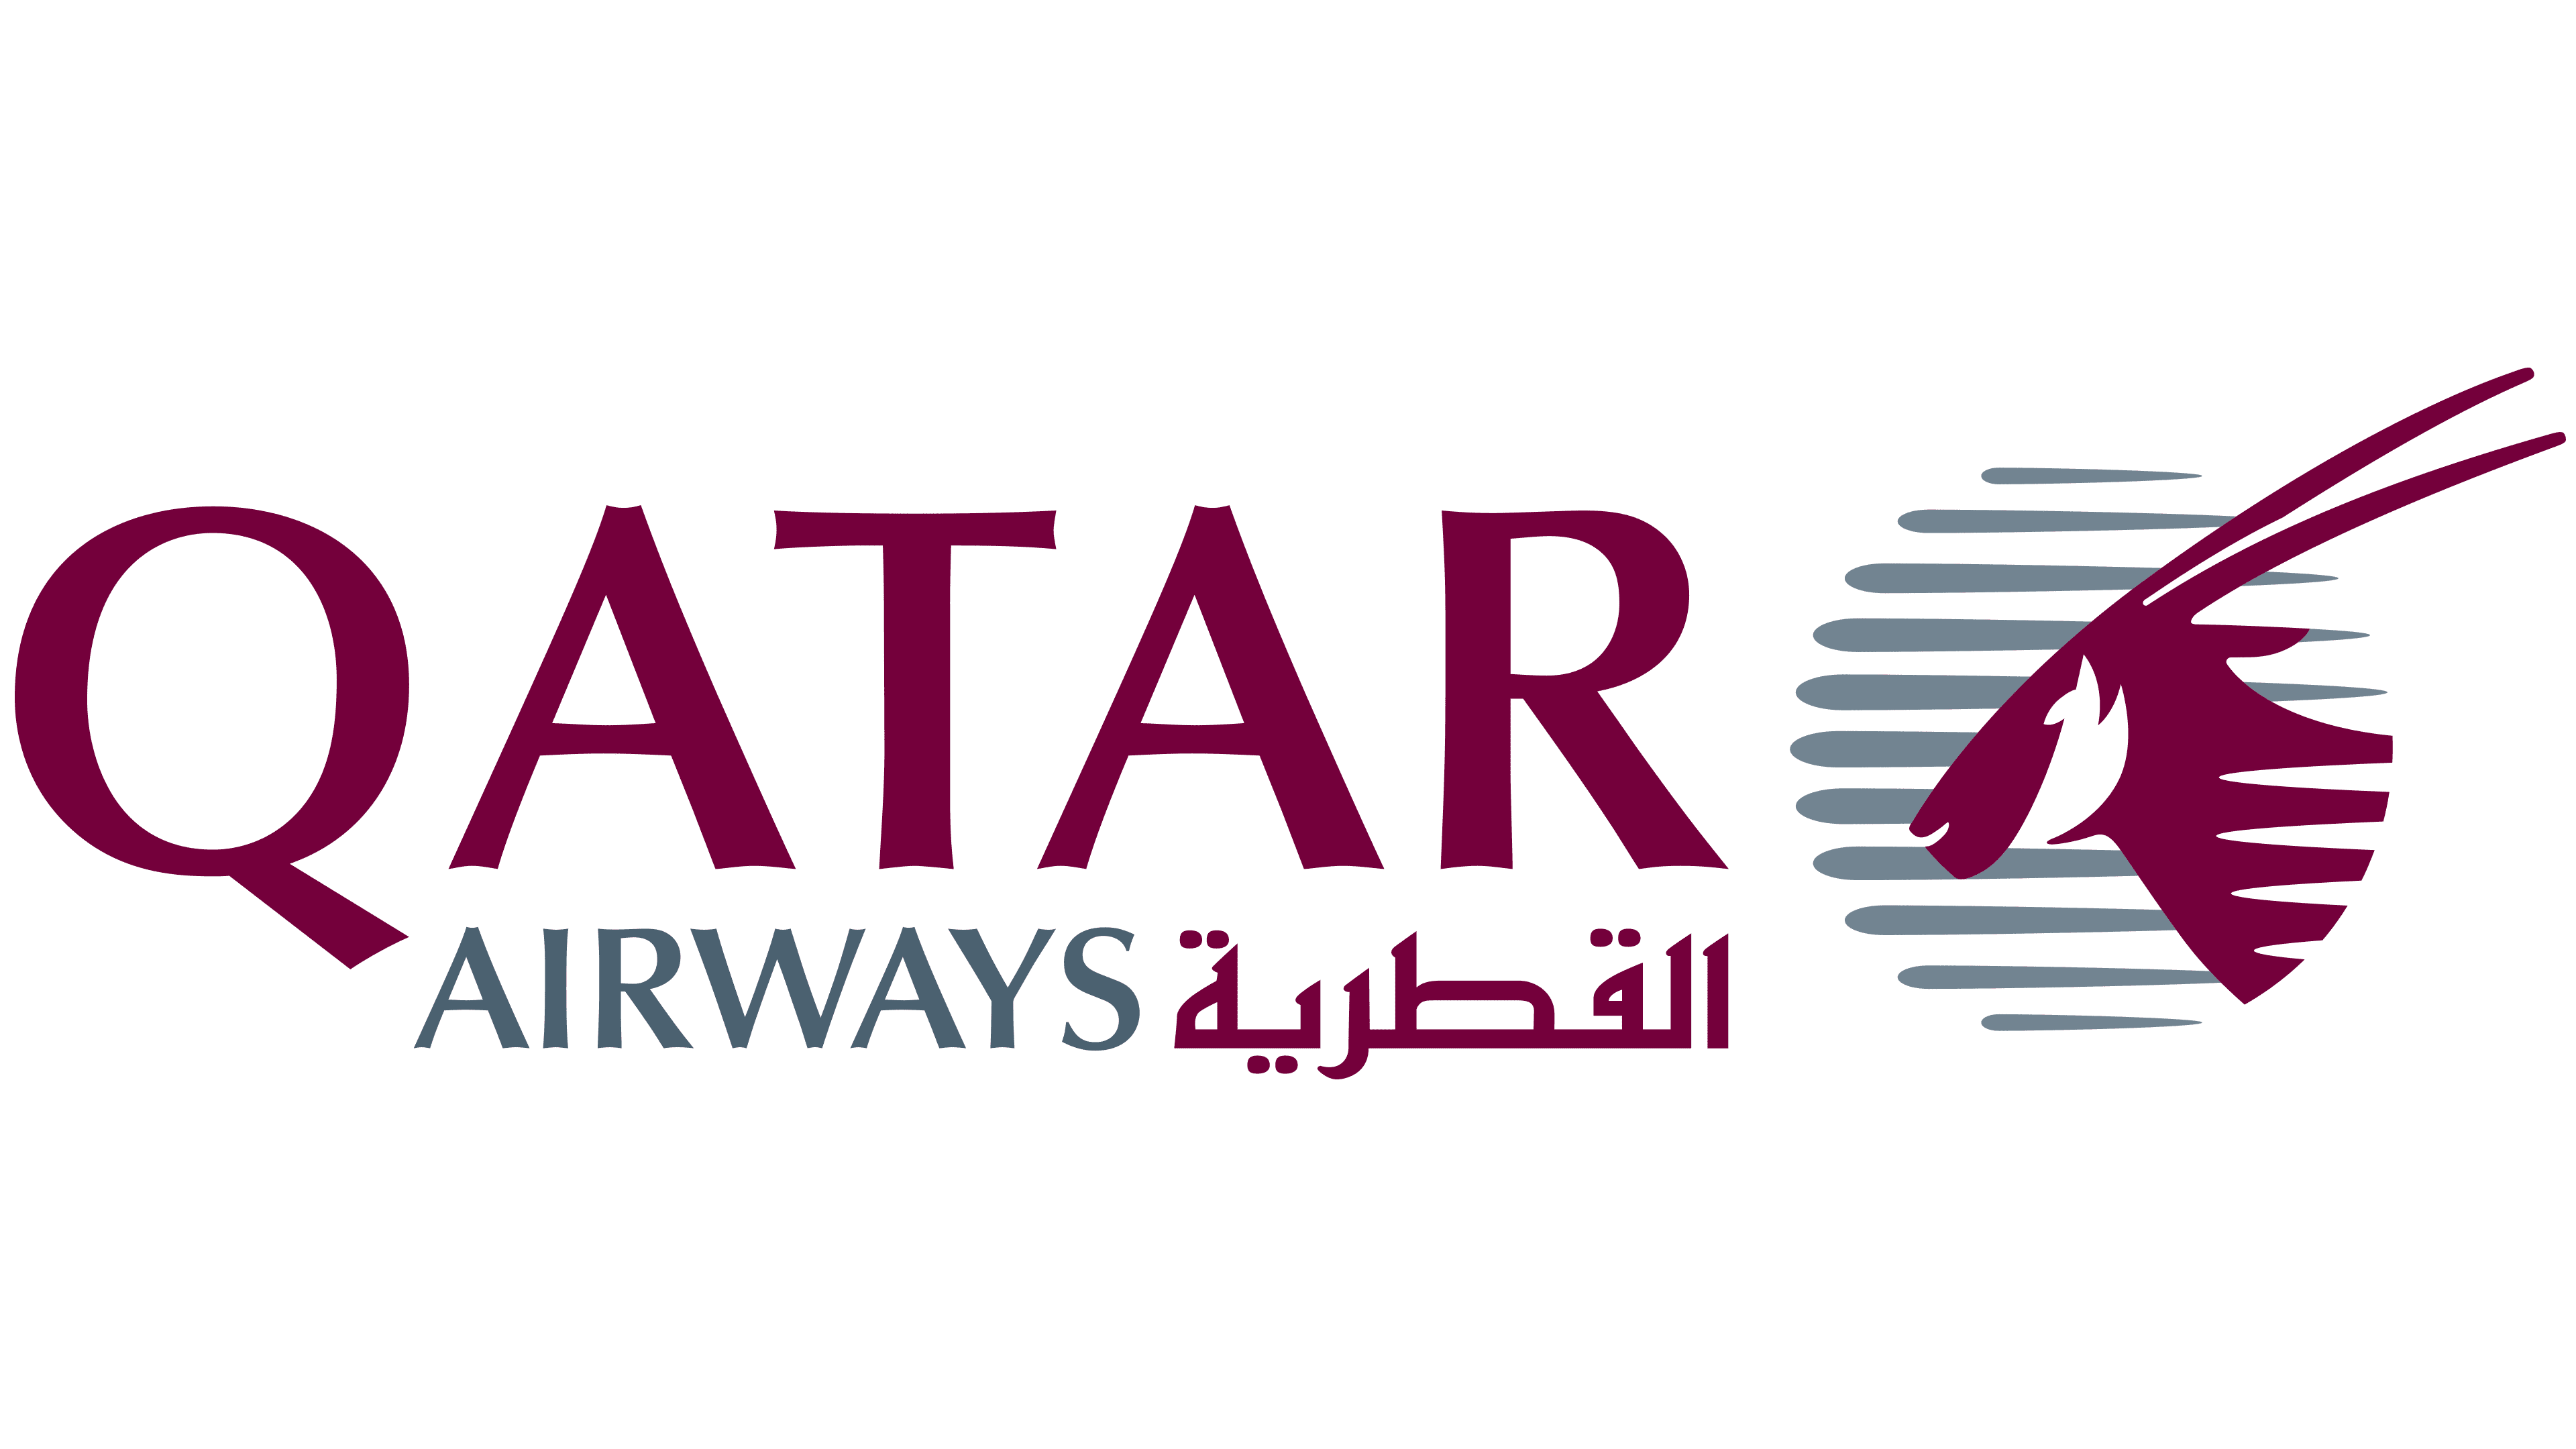 Qatar Airways coupon codes, promo codes and deals